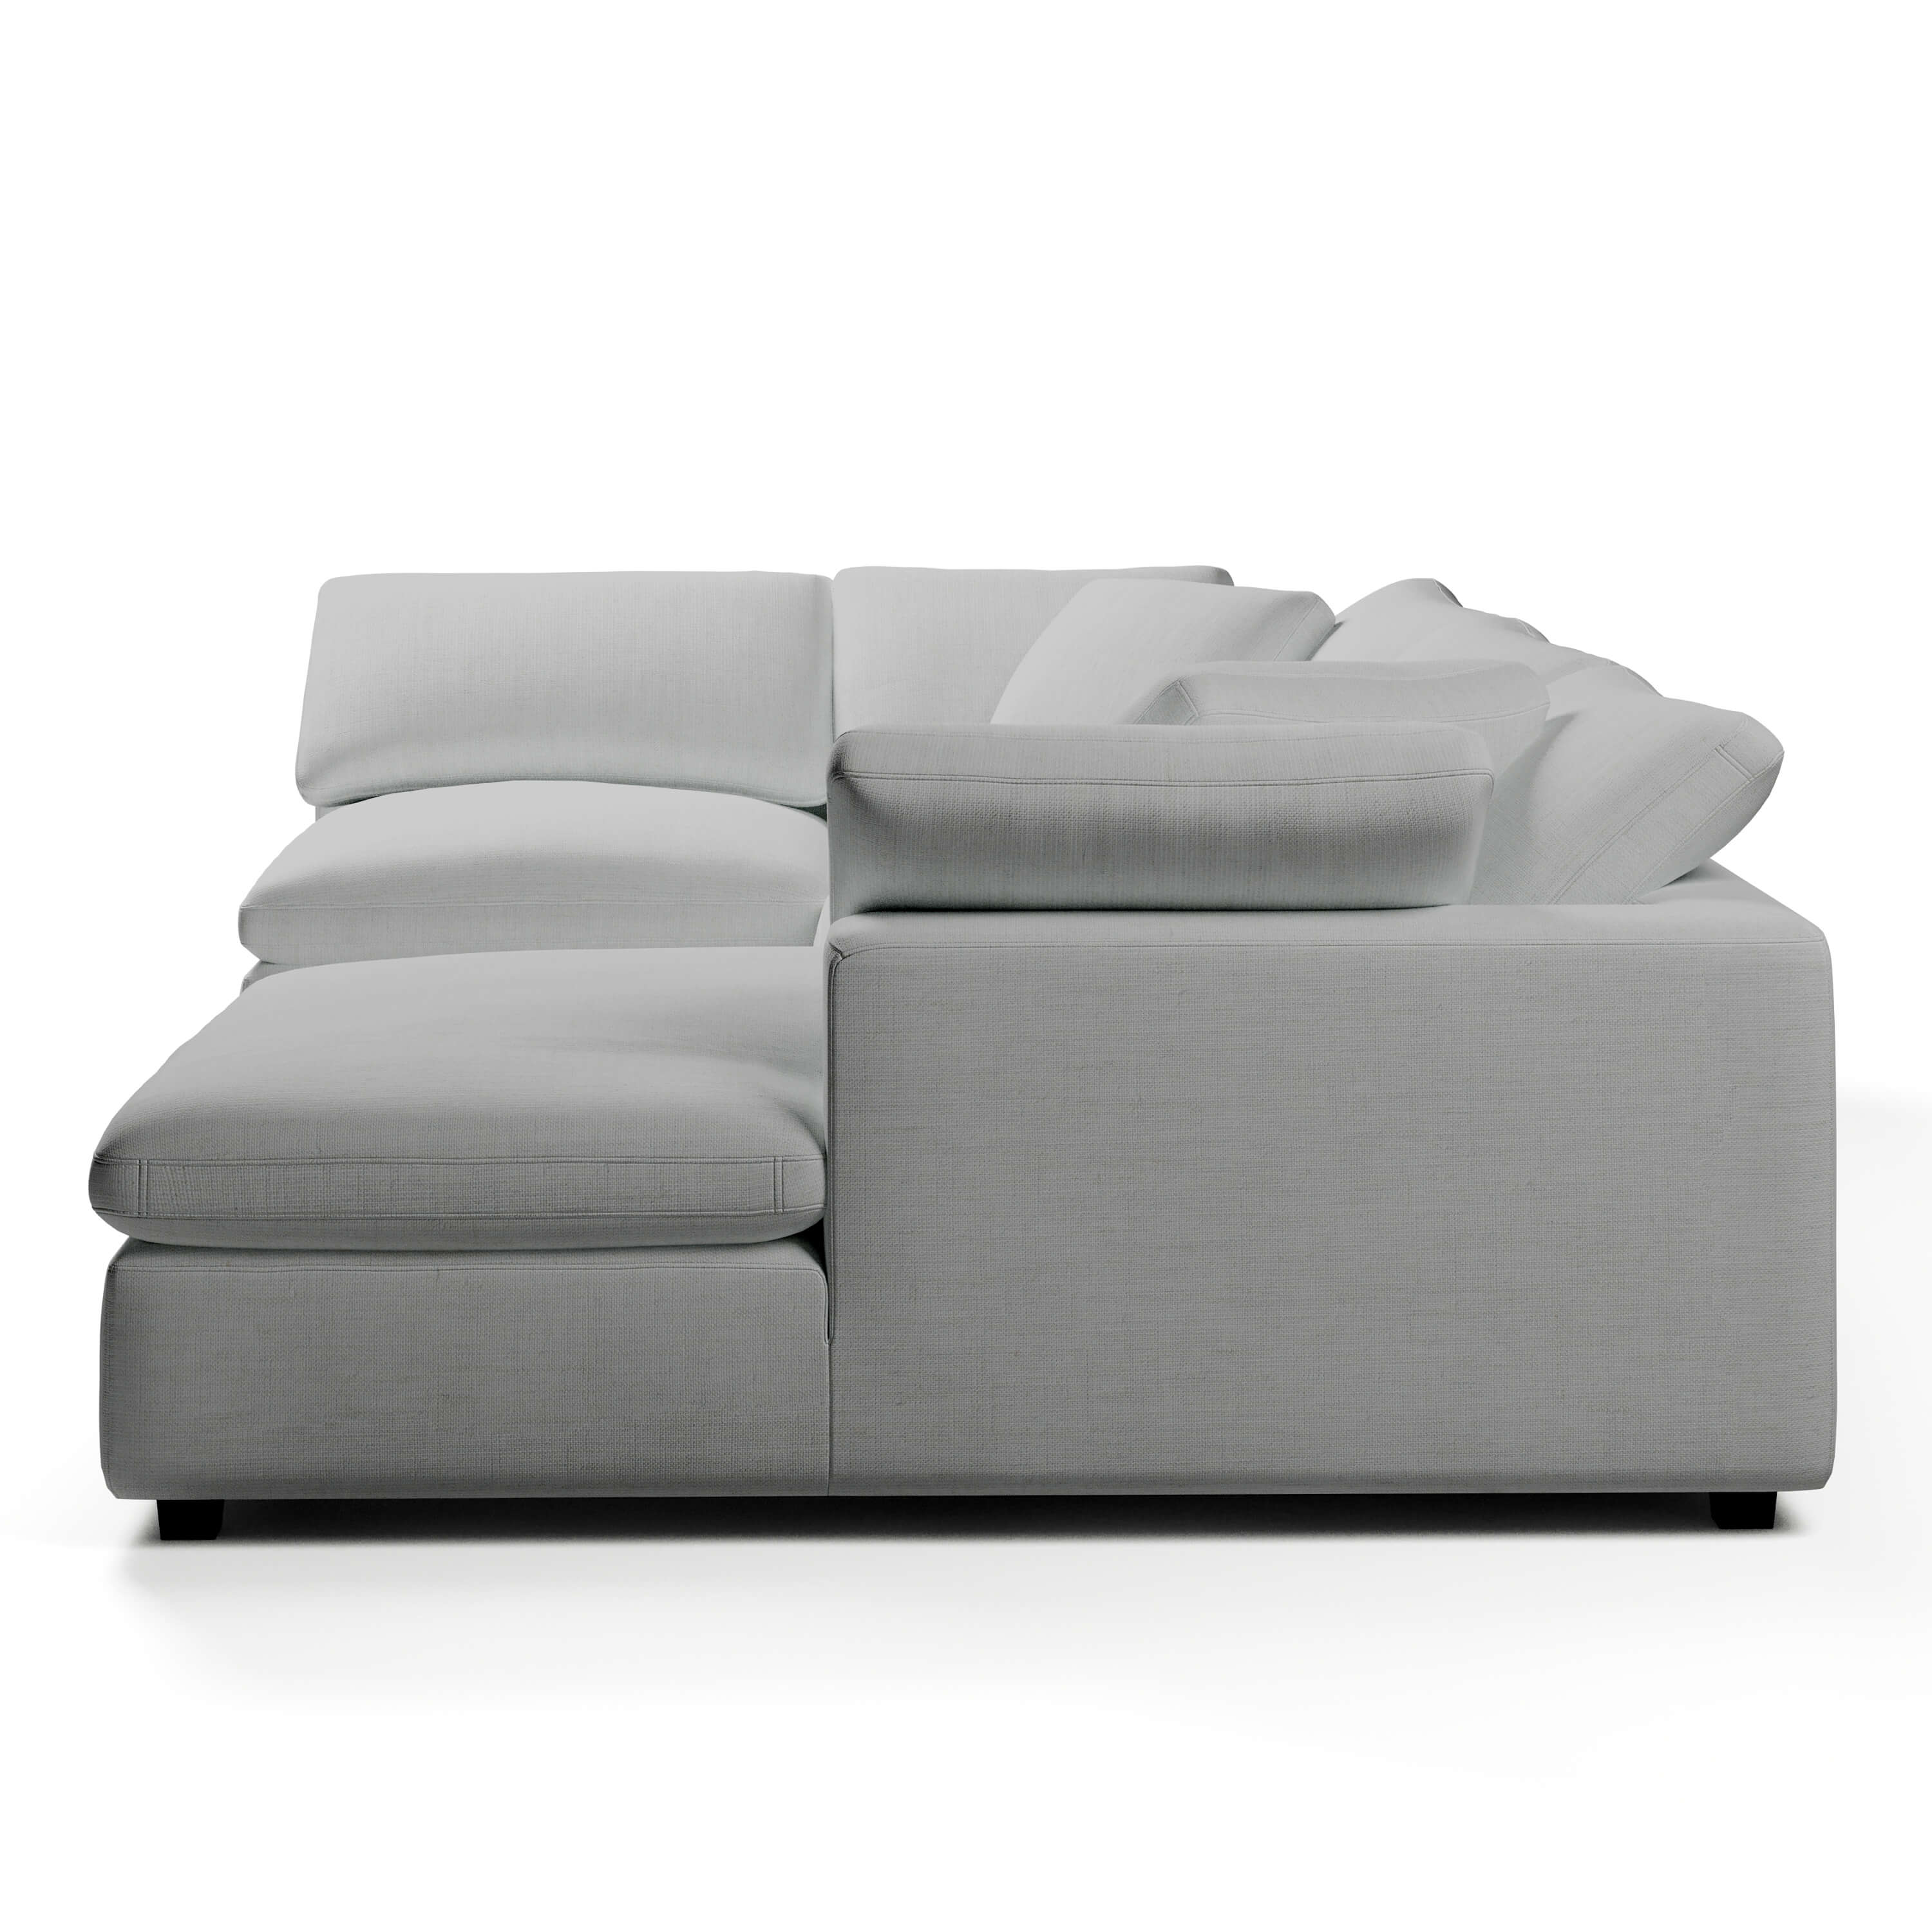 Comfy Modular Sofa - 4-Seater Chaise Sectional - Right Hand Facing